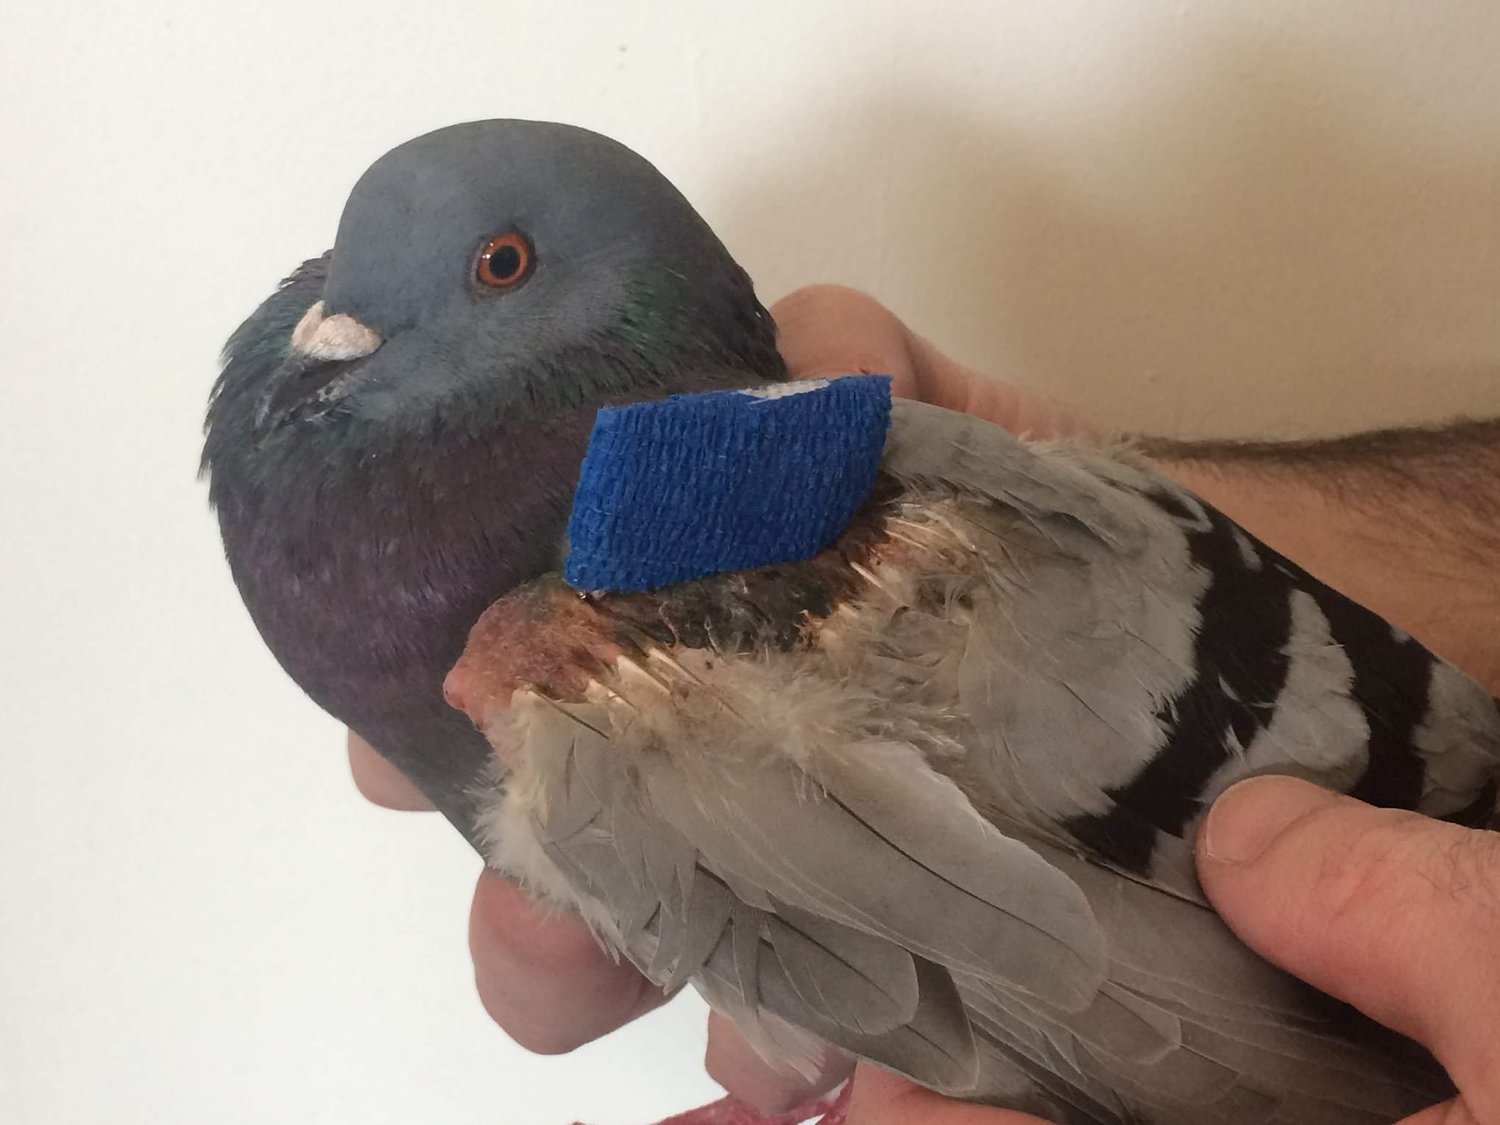 This pigeon had surgery to fix a broken wing. The blue object is an external wing fixator that was removed after a few weeks.